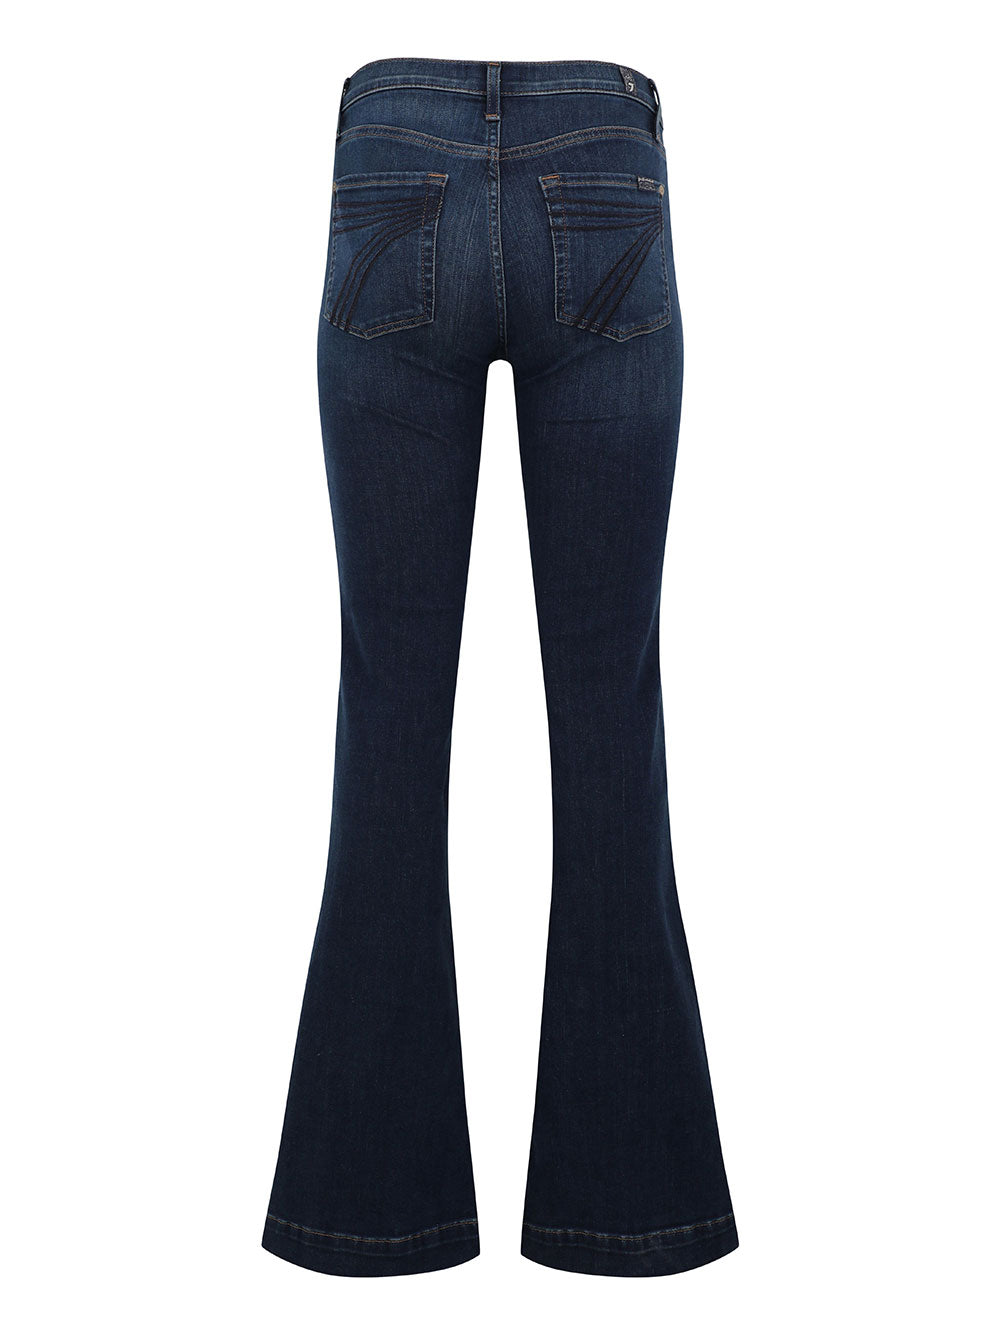 7 For All Mankind Dojo Mid Rise Flare Jeans in Opp Darby